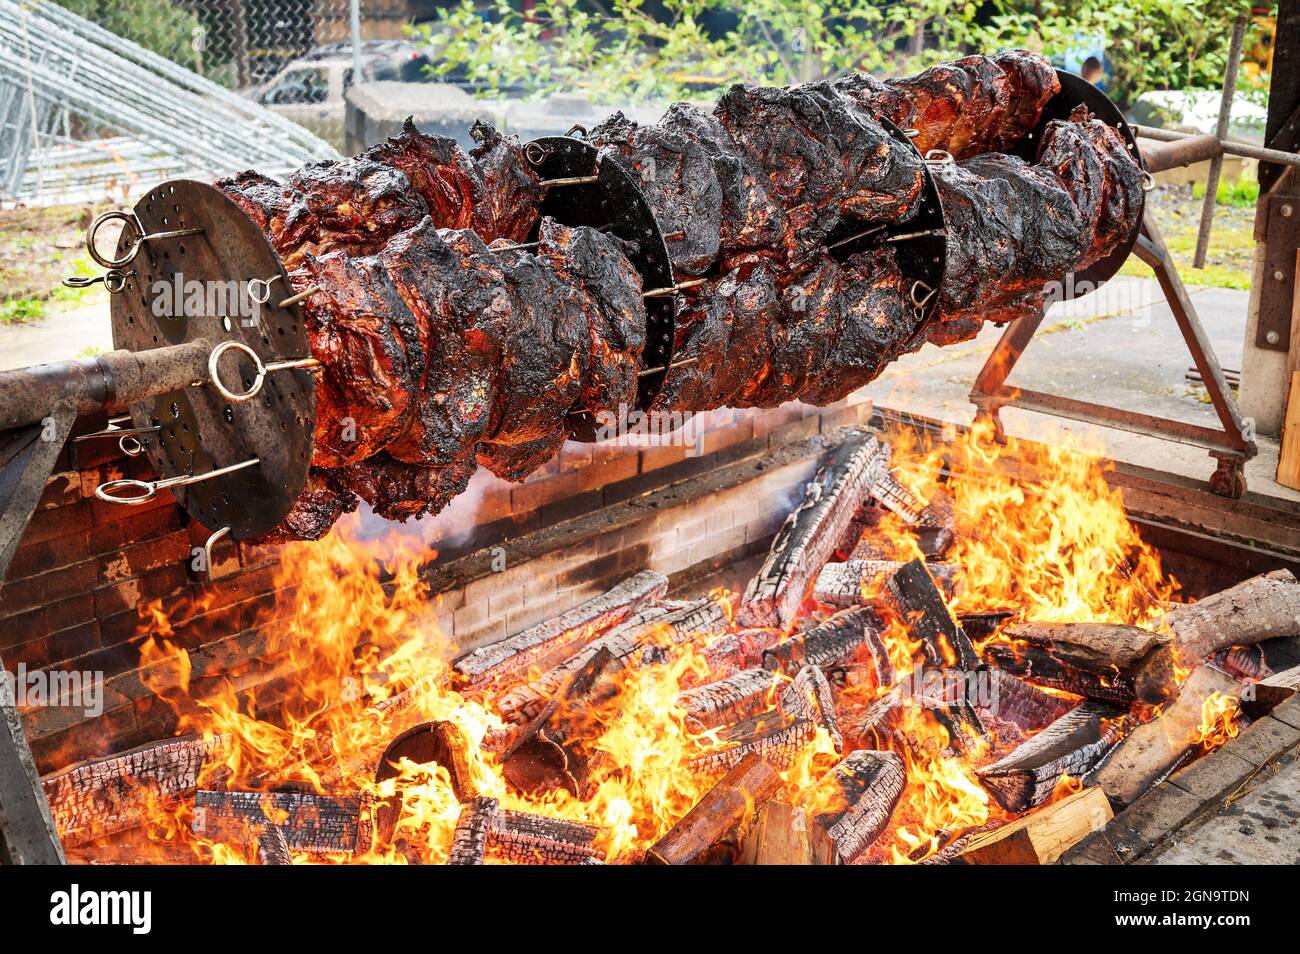 Eight hundred pounds of beef skewered on a custom made motor driven spit barbecue on an open flame fire pit.  Festival barbecue stand. Stock Photo